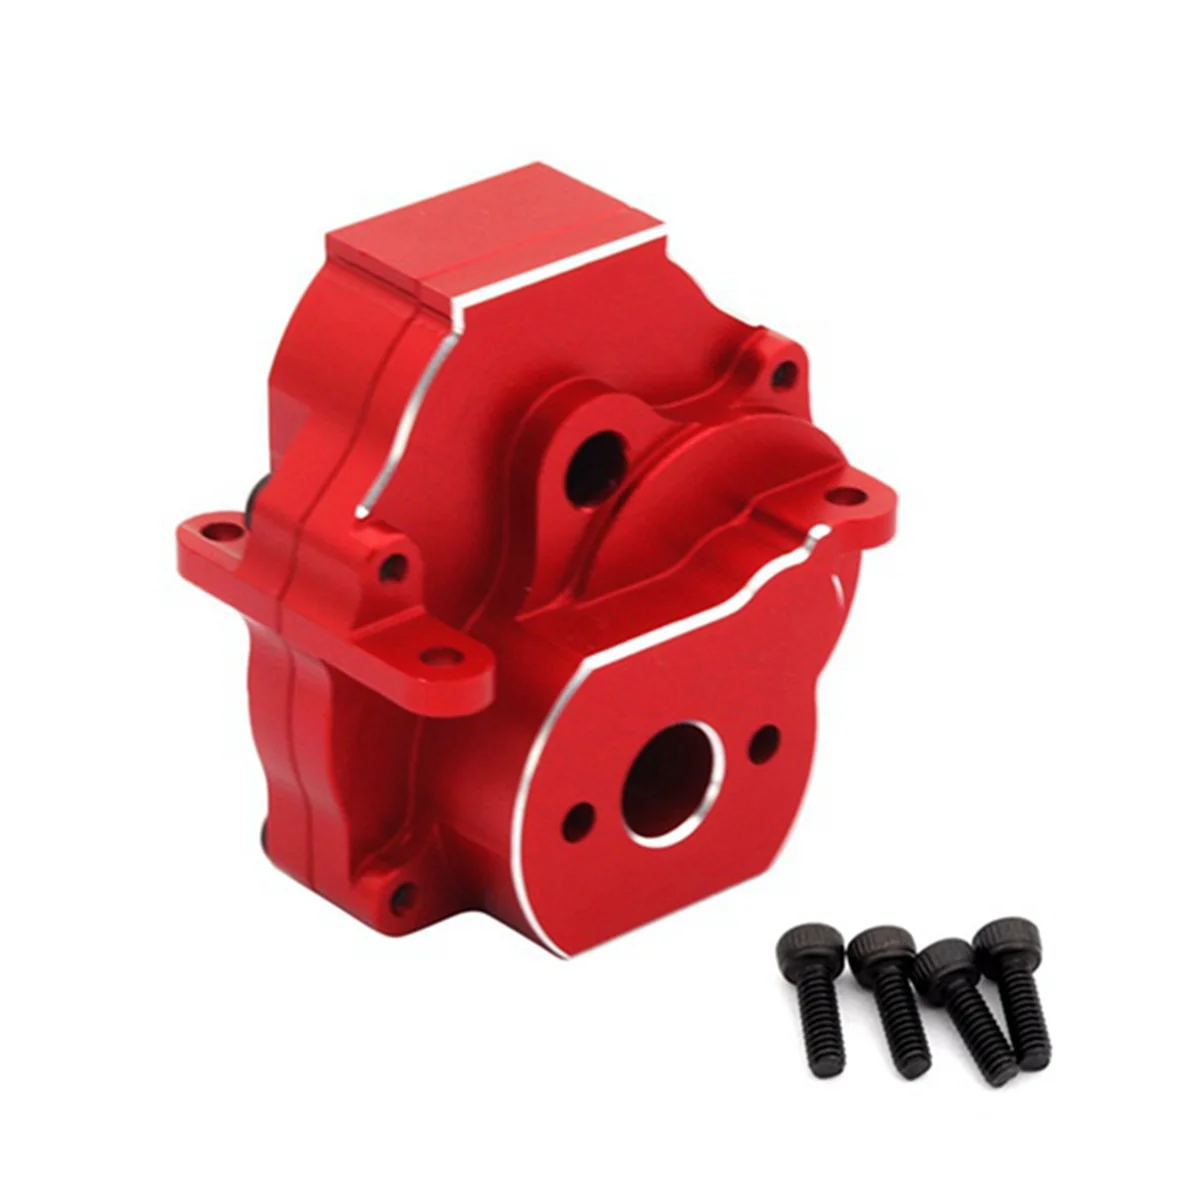 

Metal Transmission Transmission Housing for Traxxas TRX4M TRX-4M 1/18 RC Track Truck Upgrade Parts, Red